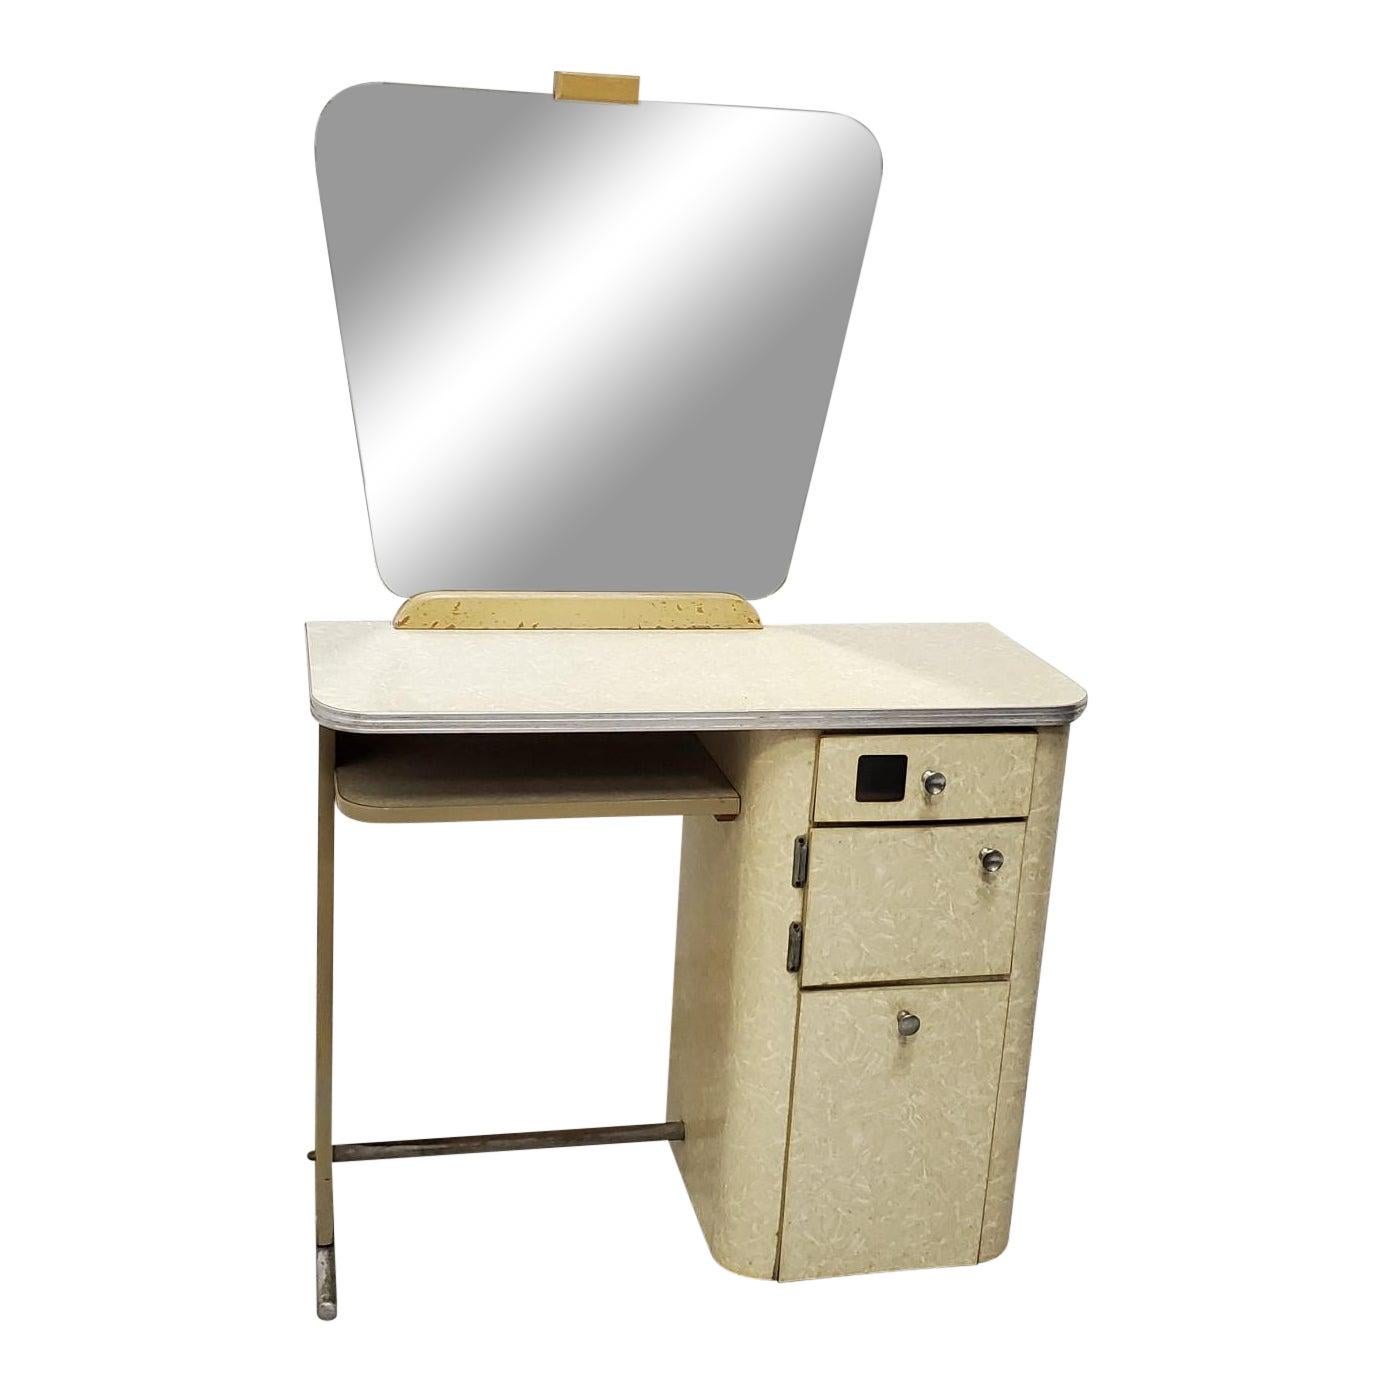 1950s Free Standing Beauty Salon Styling Station with Mirror Vanity Hair Salon For Sale 7